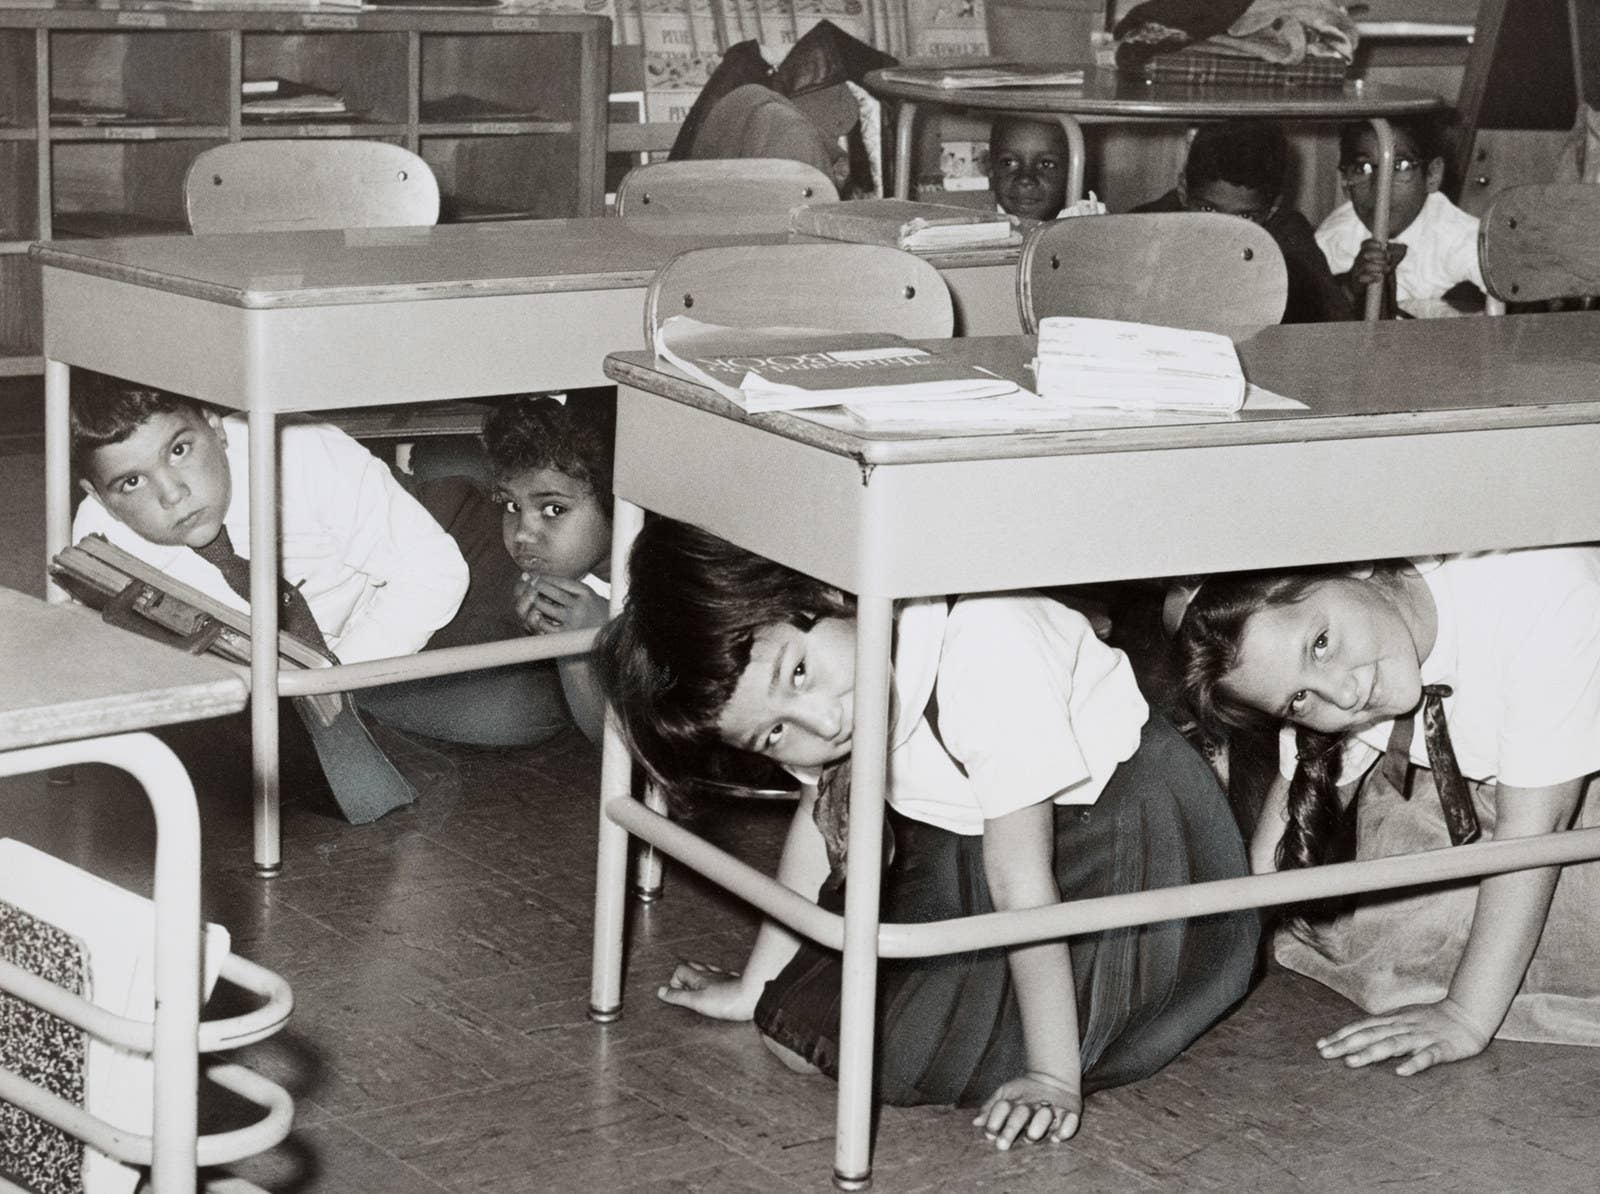 Students at a Brooklyn middle school in 1962 conduct a duck-and-cover practice drill in preparation for a nuclear attack.